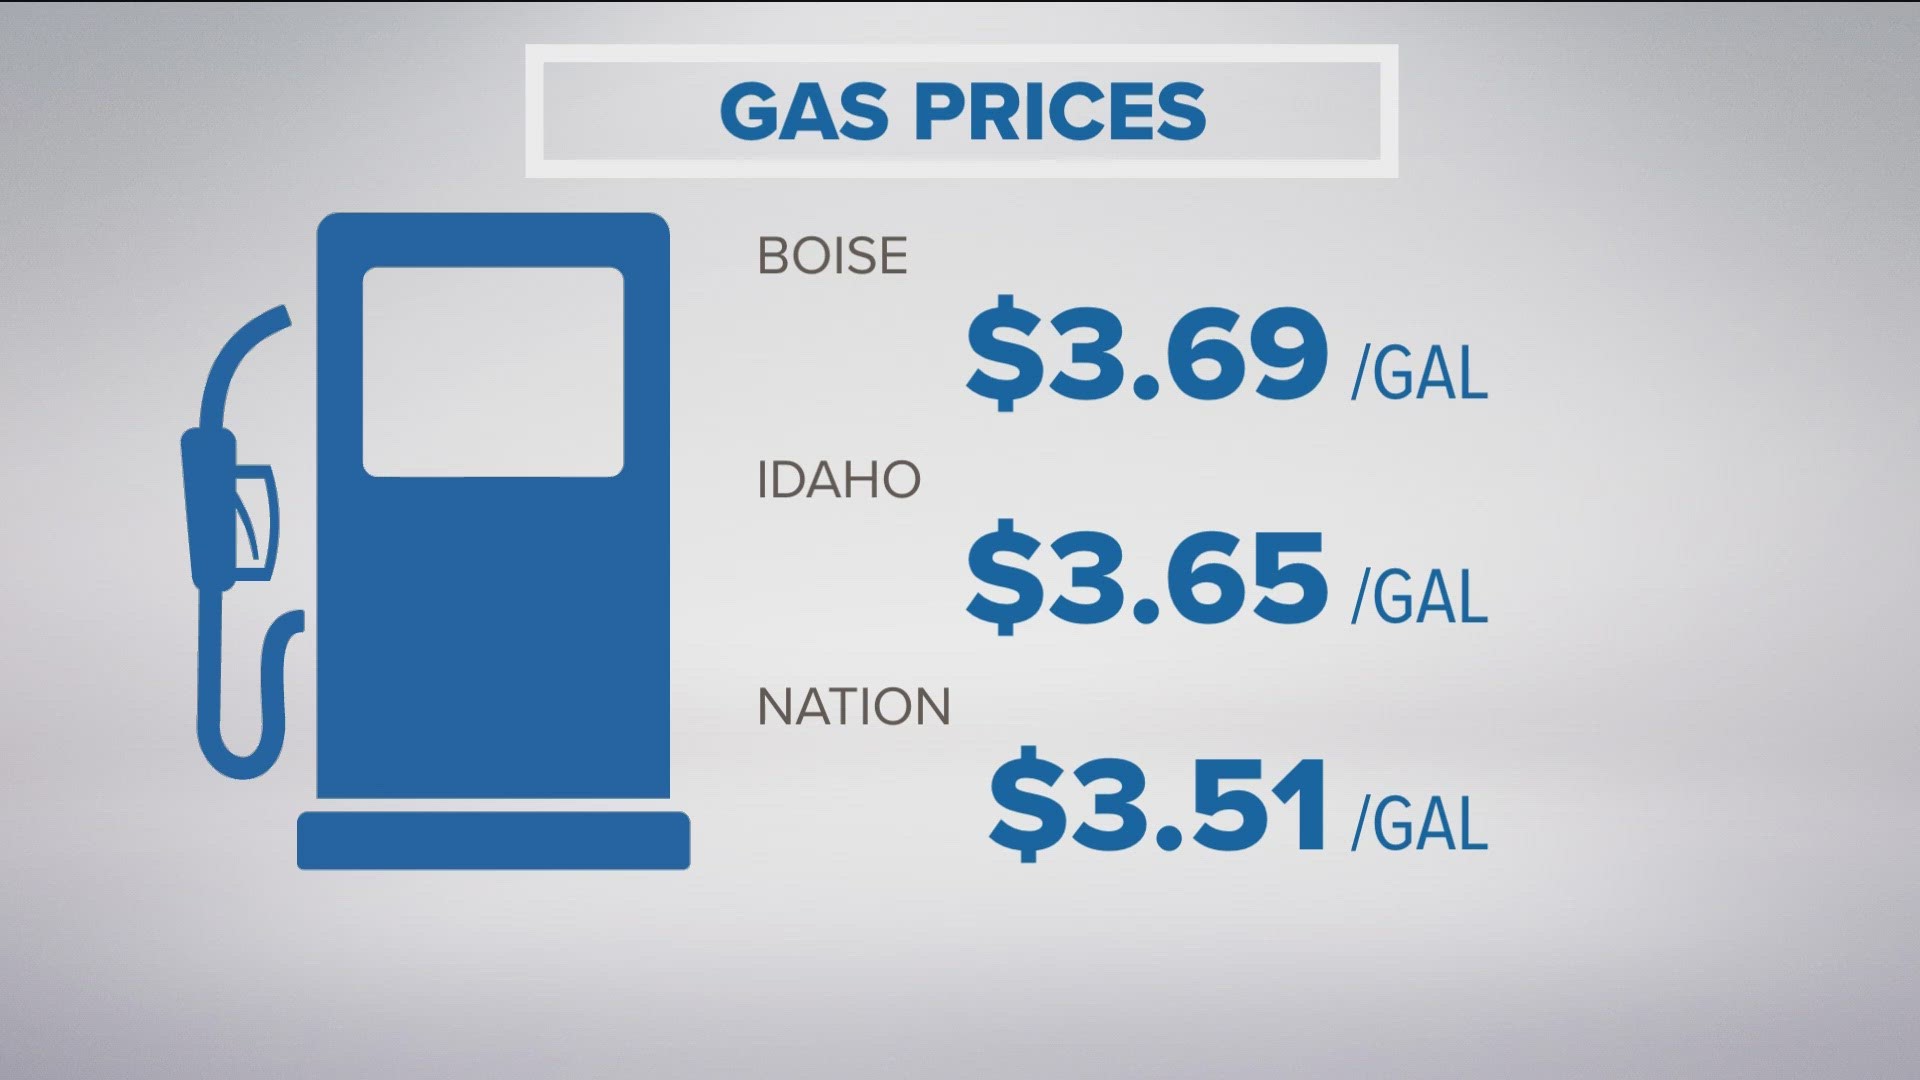 Boise prices are 49 cents higher than a month ago, and are three cents higher than a year ago.